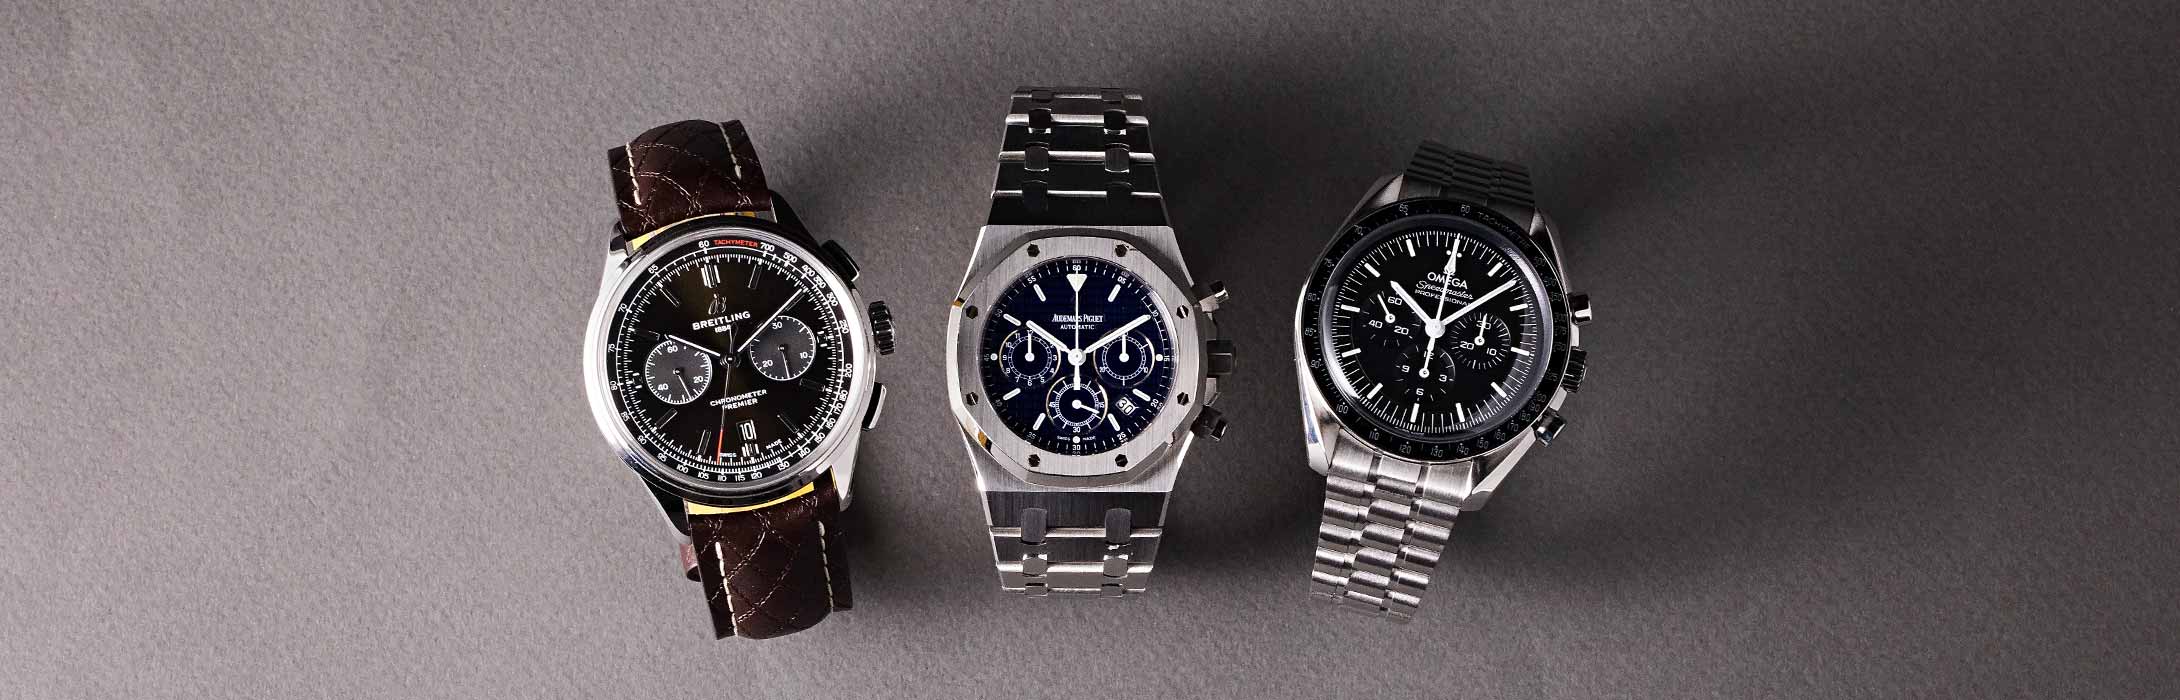 Three luxury watches - one black and gold chronograph, one stainless steel chronograph, and one stainless steel watch with black dial - displayed side-by-side on a gray background